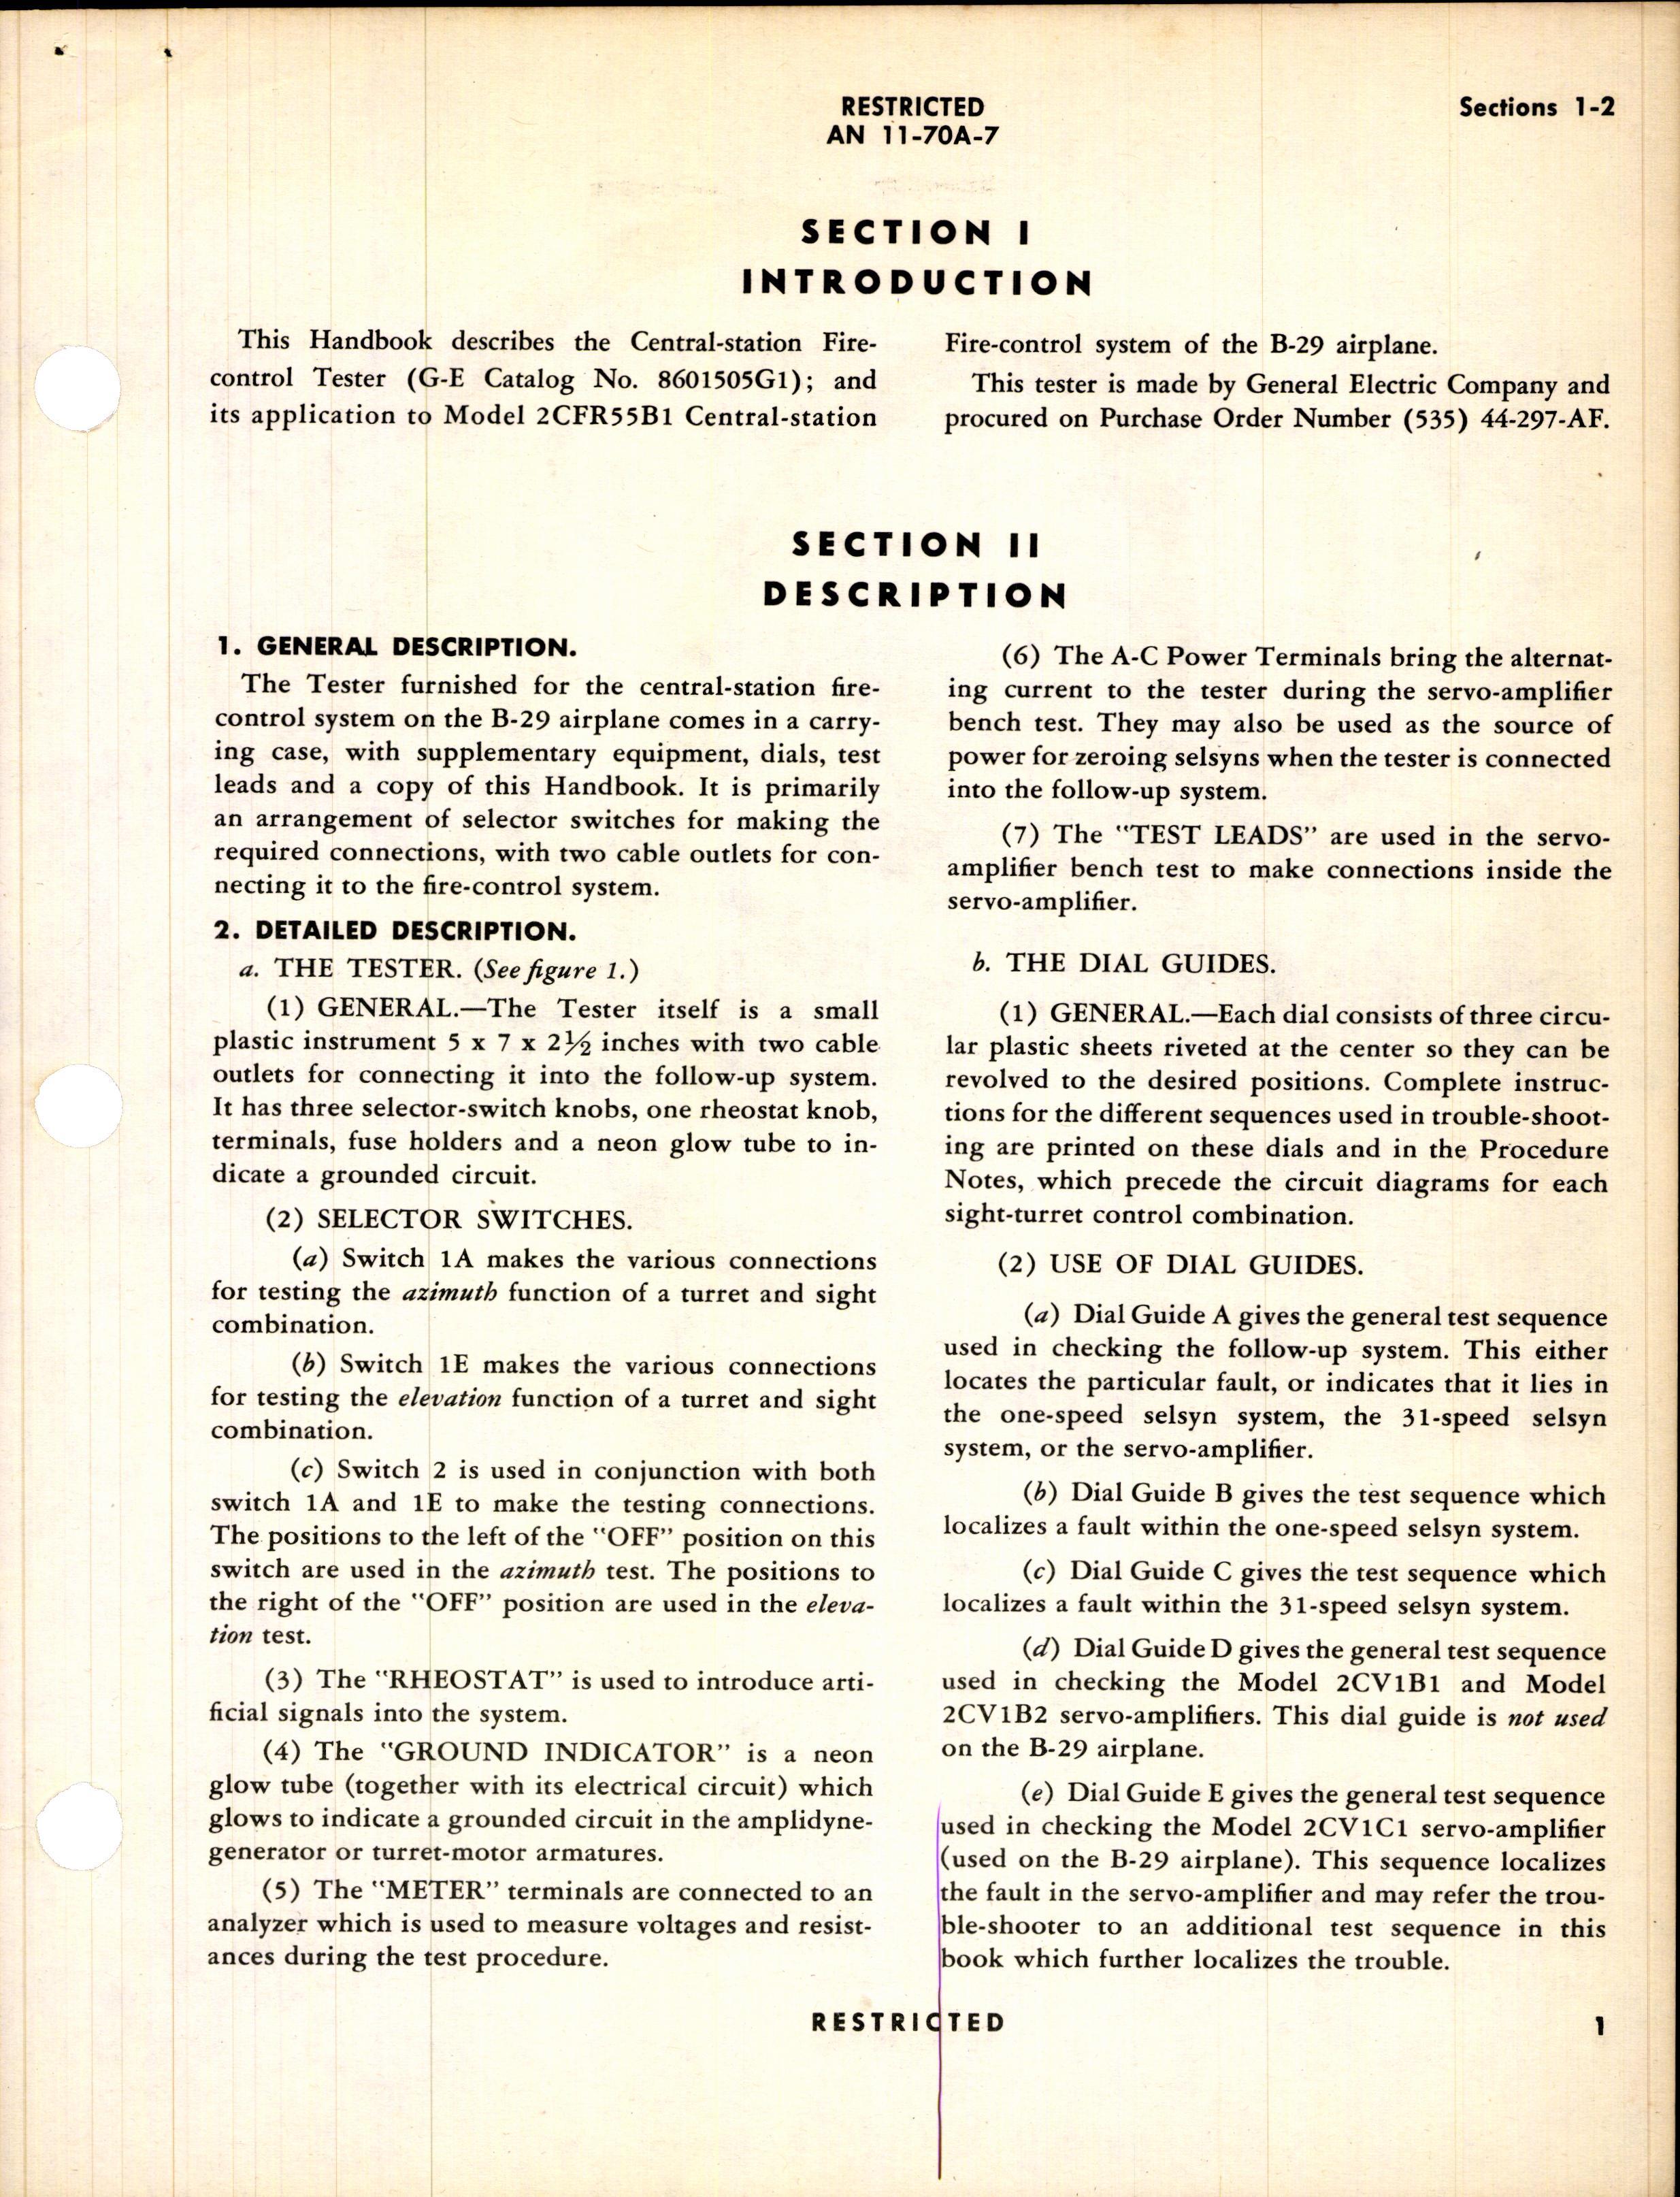 Sample page 5 from AirCorps Library document: Operation & Service Instructions for Central-Station Fire-Control Tester